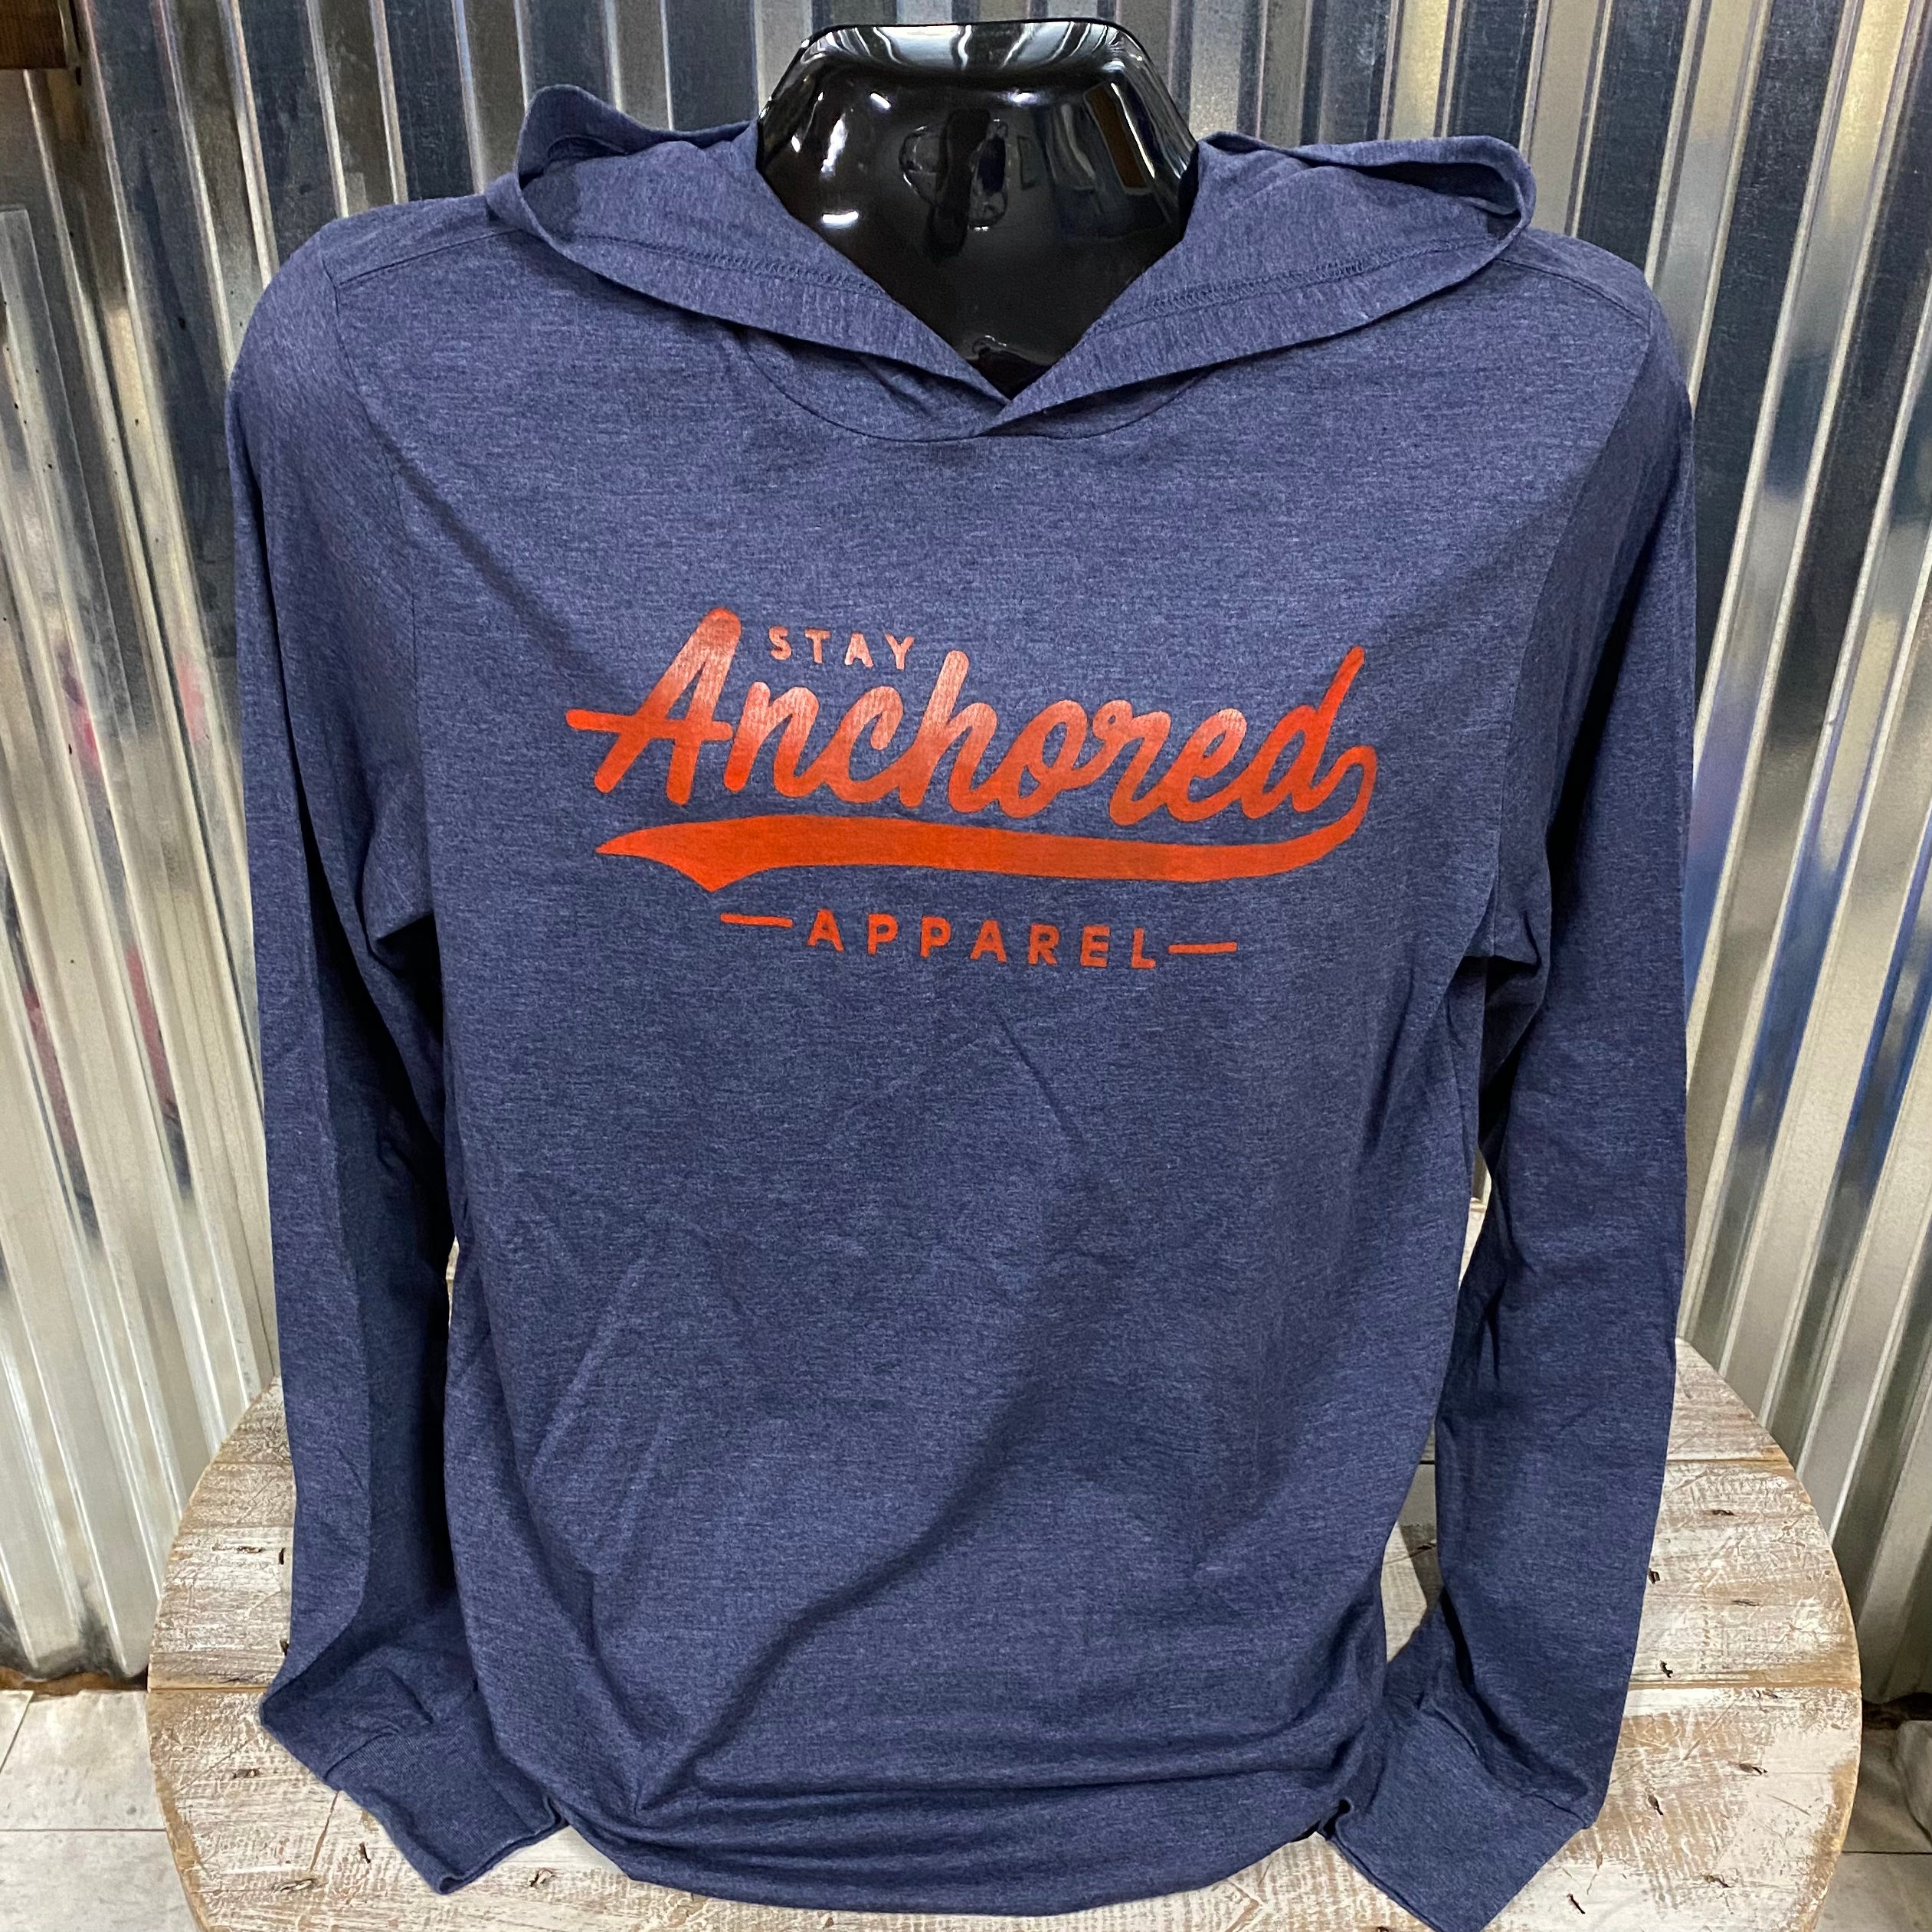 Stay Anchored Apparel Tee Hoodie